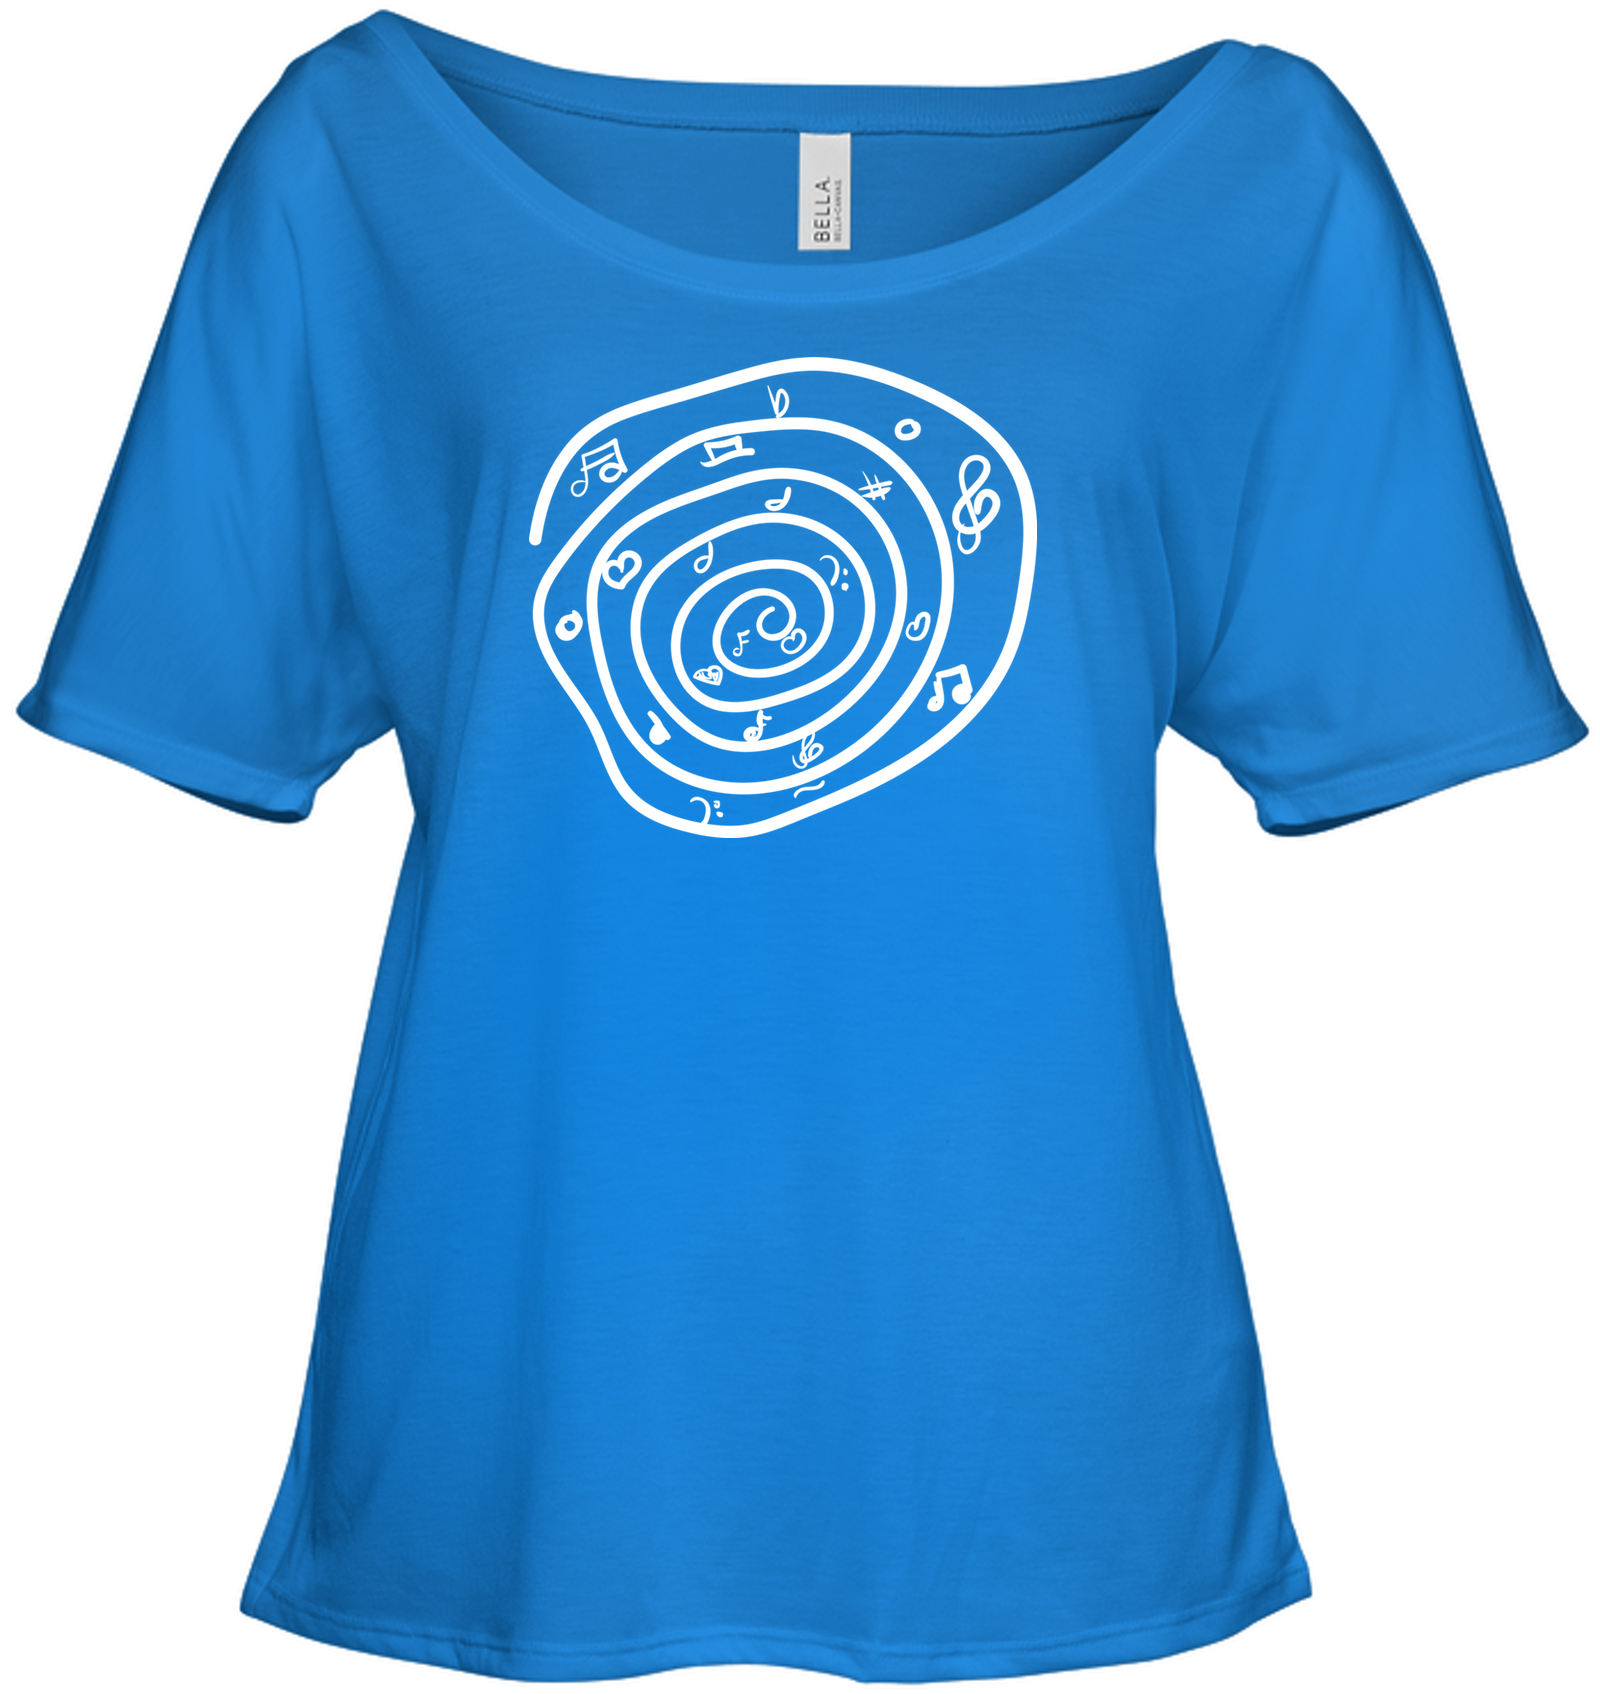 Notes in a Swirl - Bella + Canvas Women's Slouchy Tee